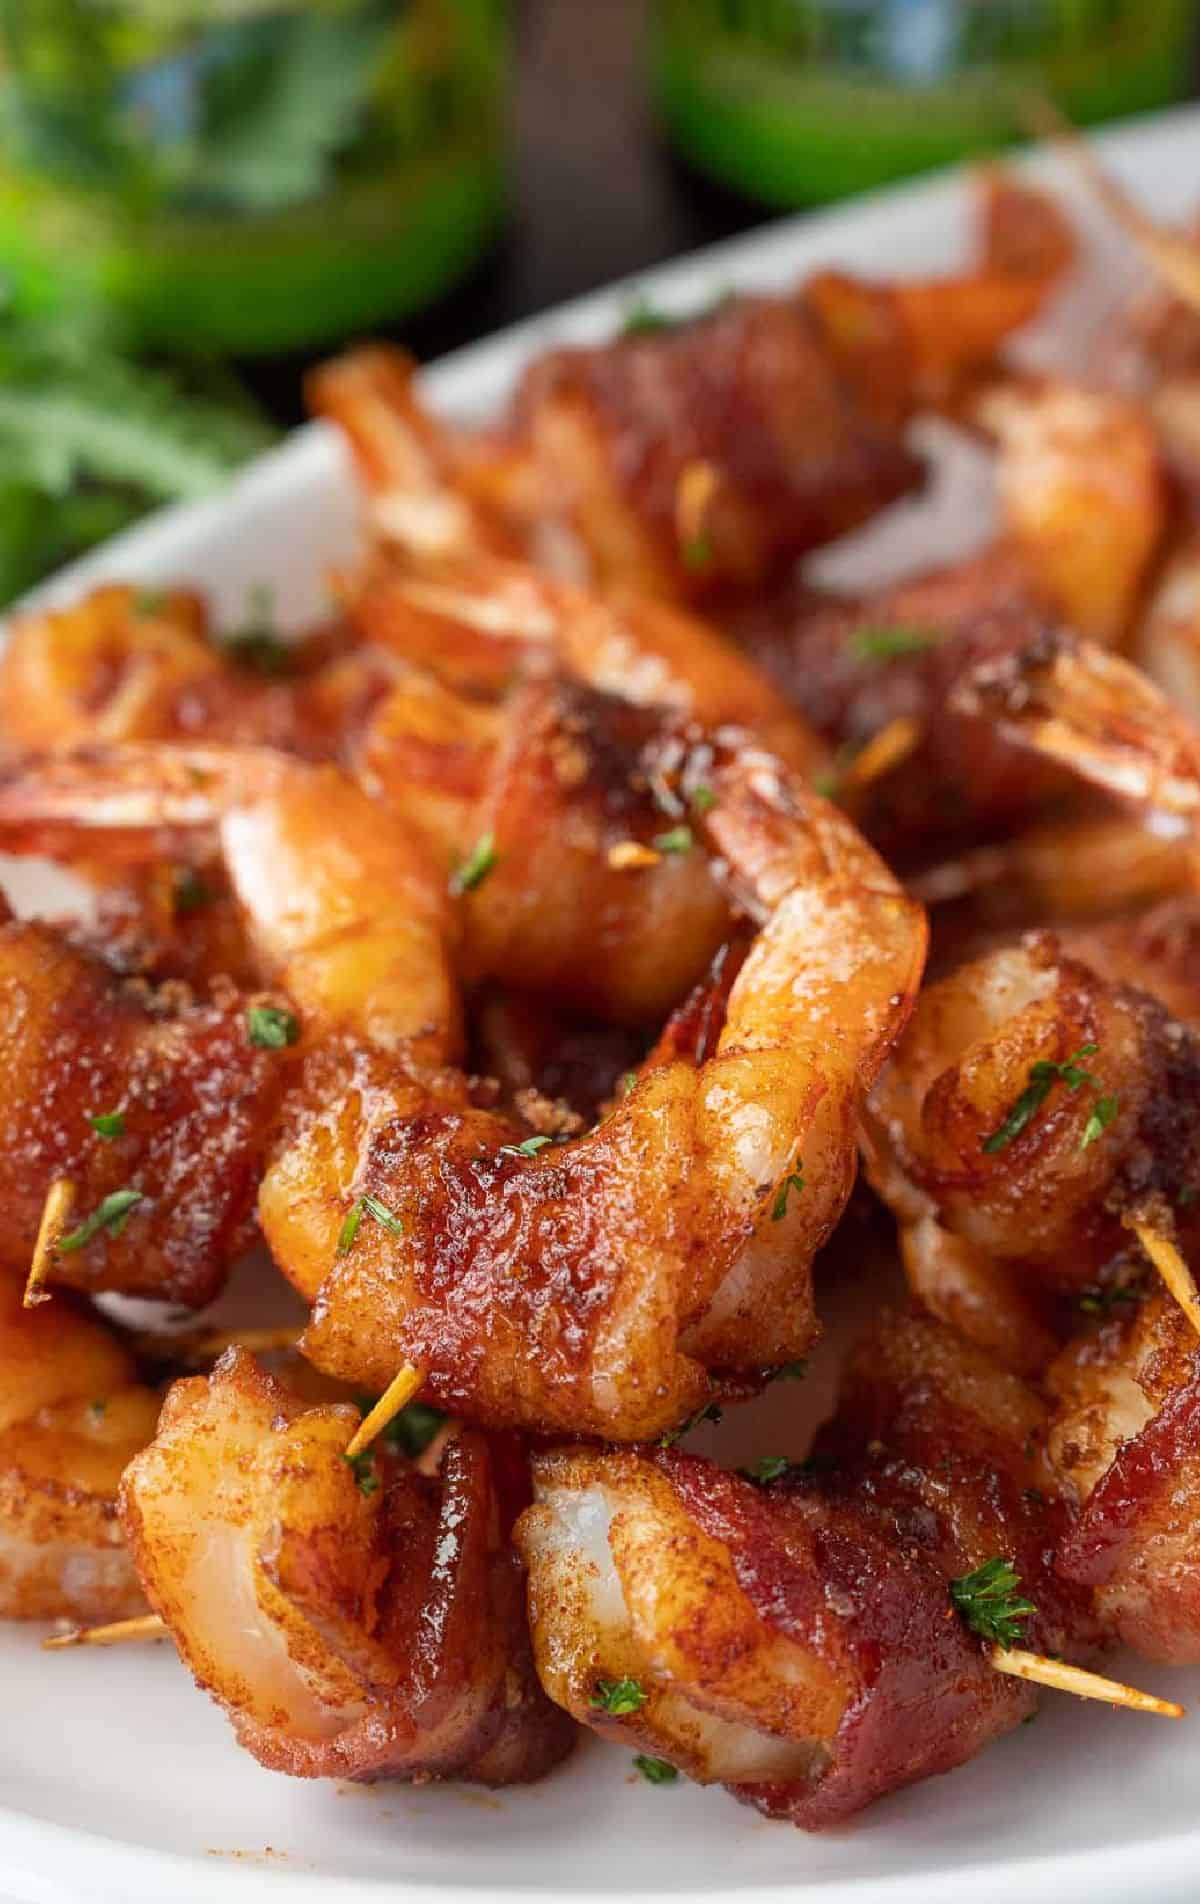 A plate of bacon wrapped shrimp.